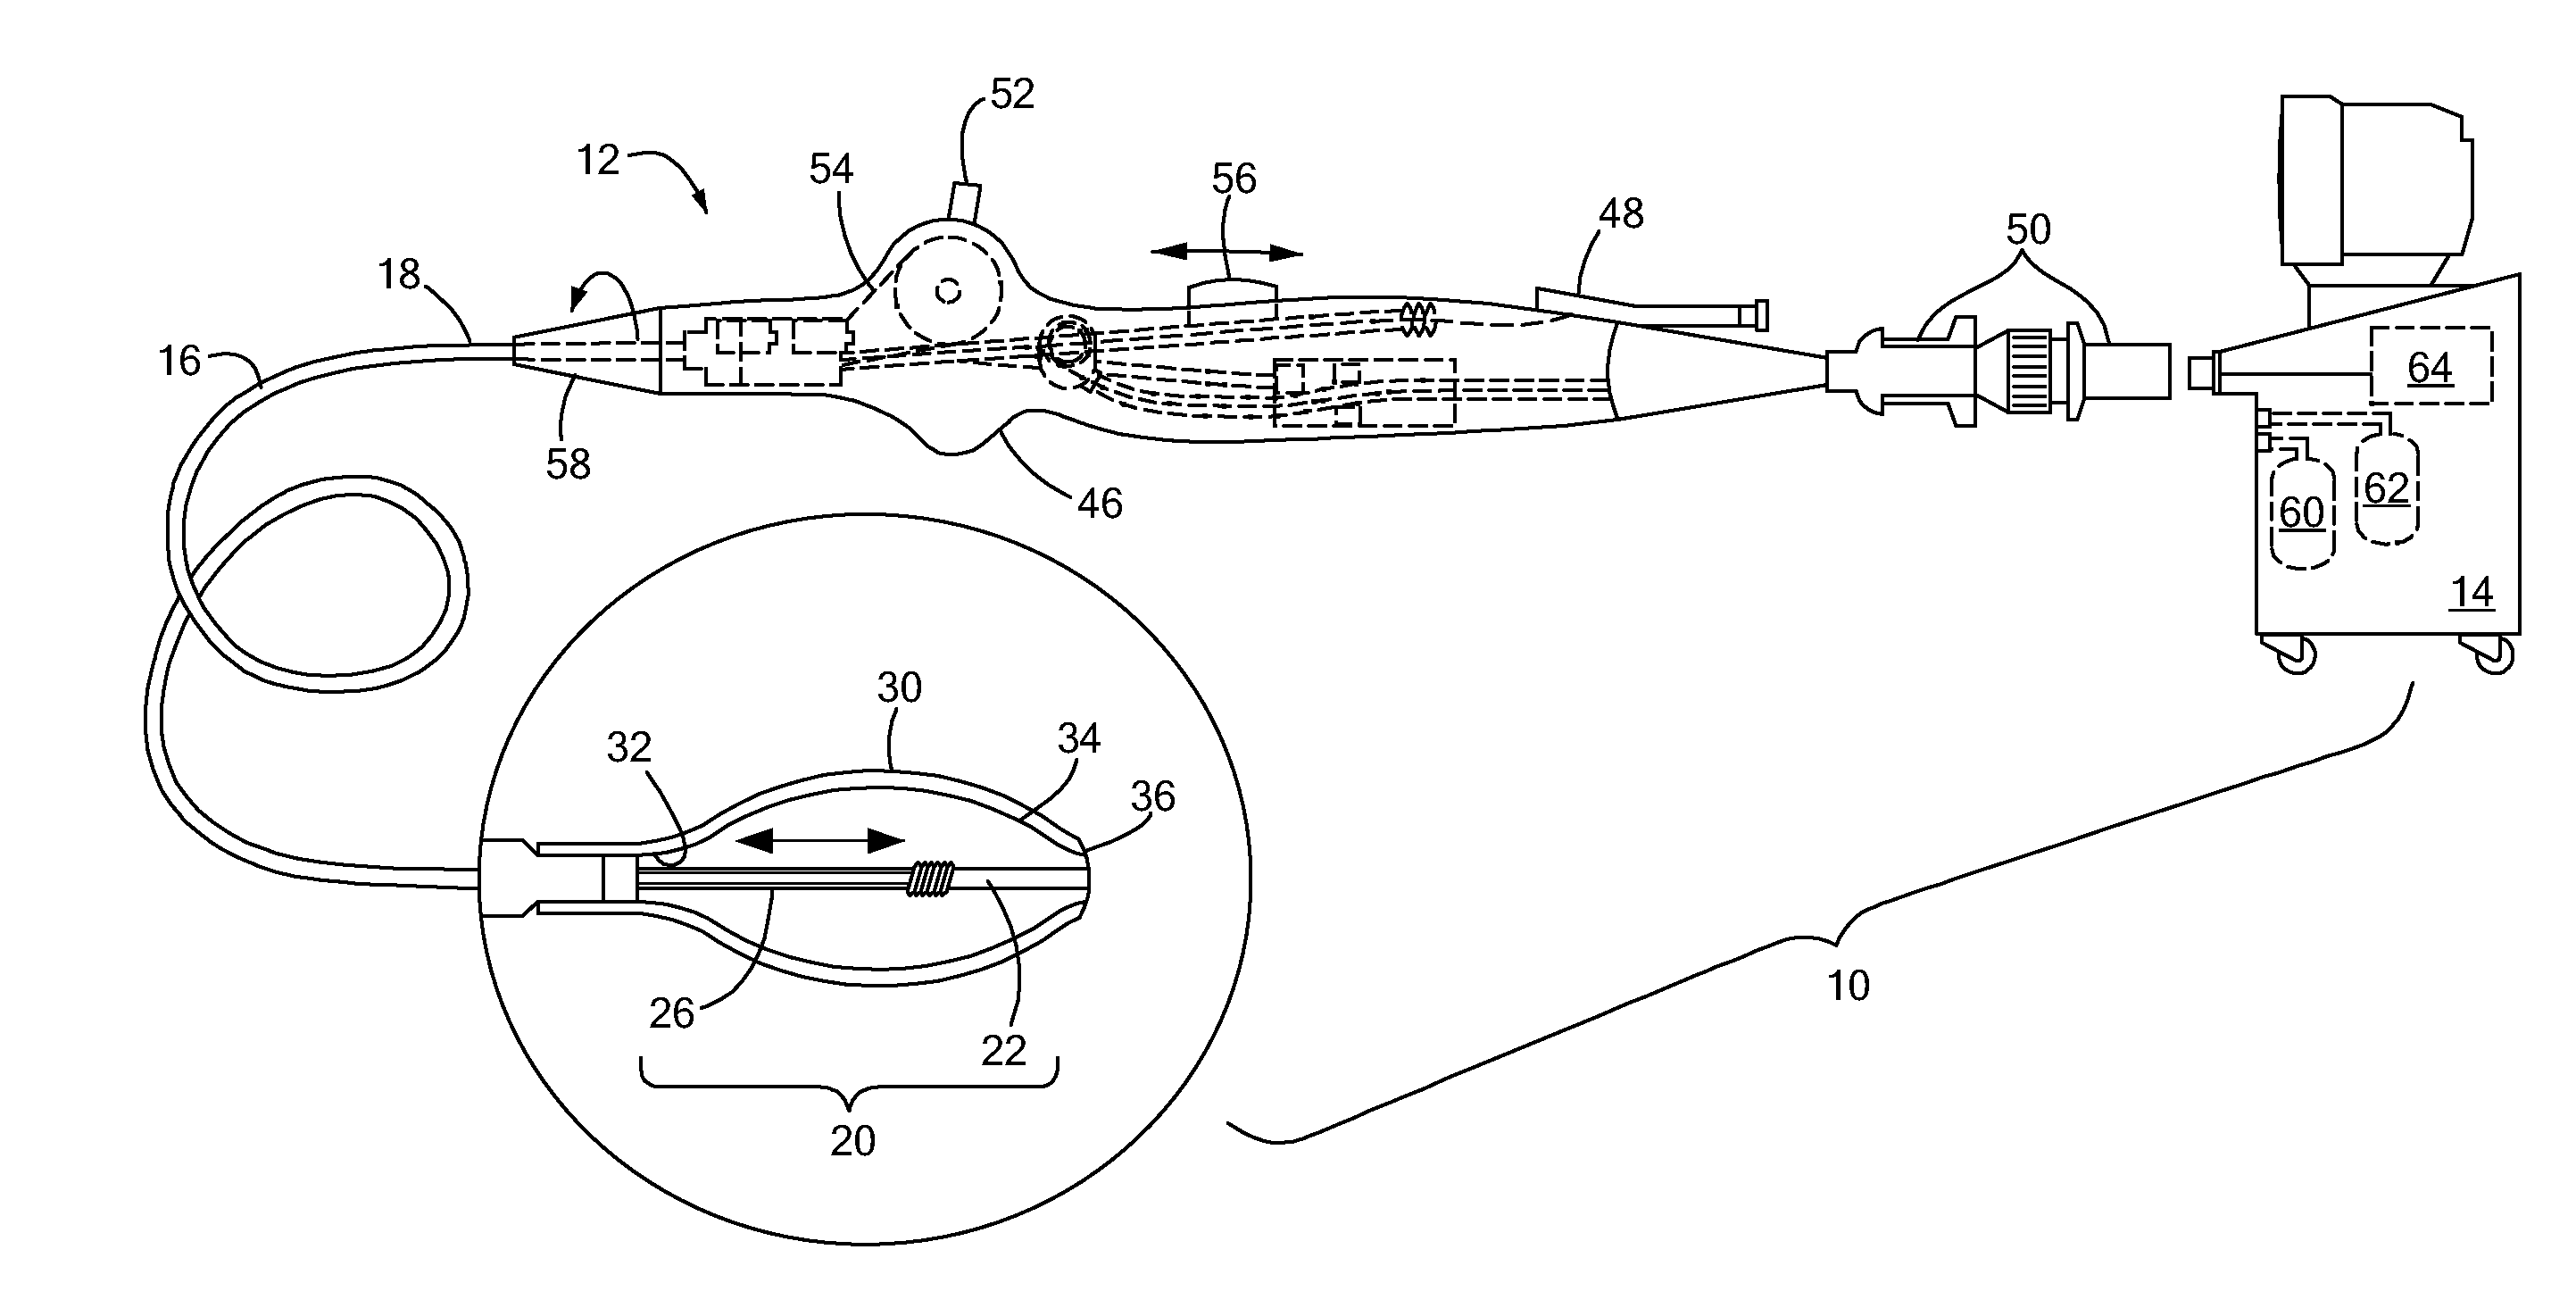 Electrical sensing systems and methods of use for treating tissue